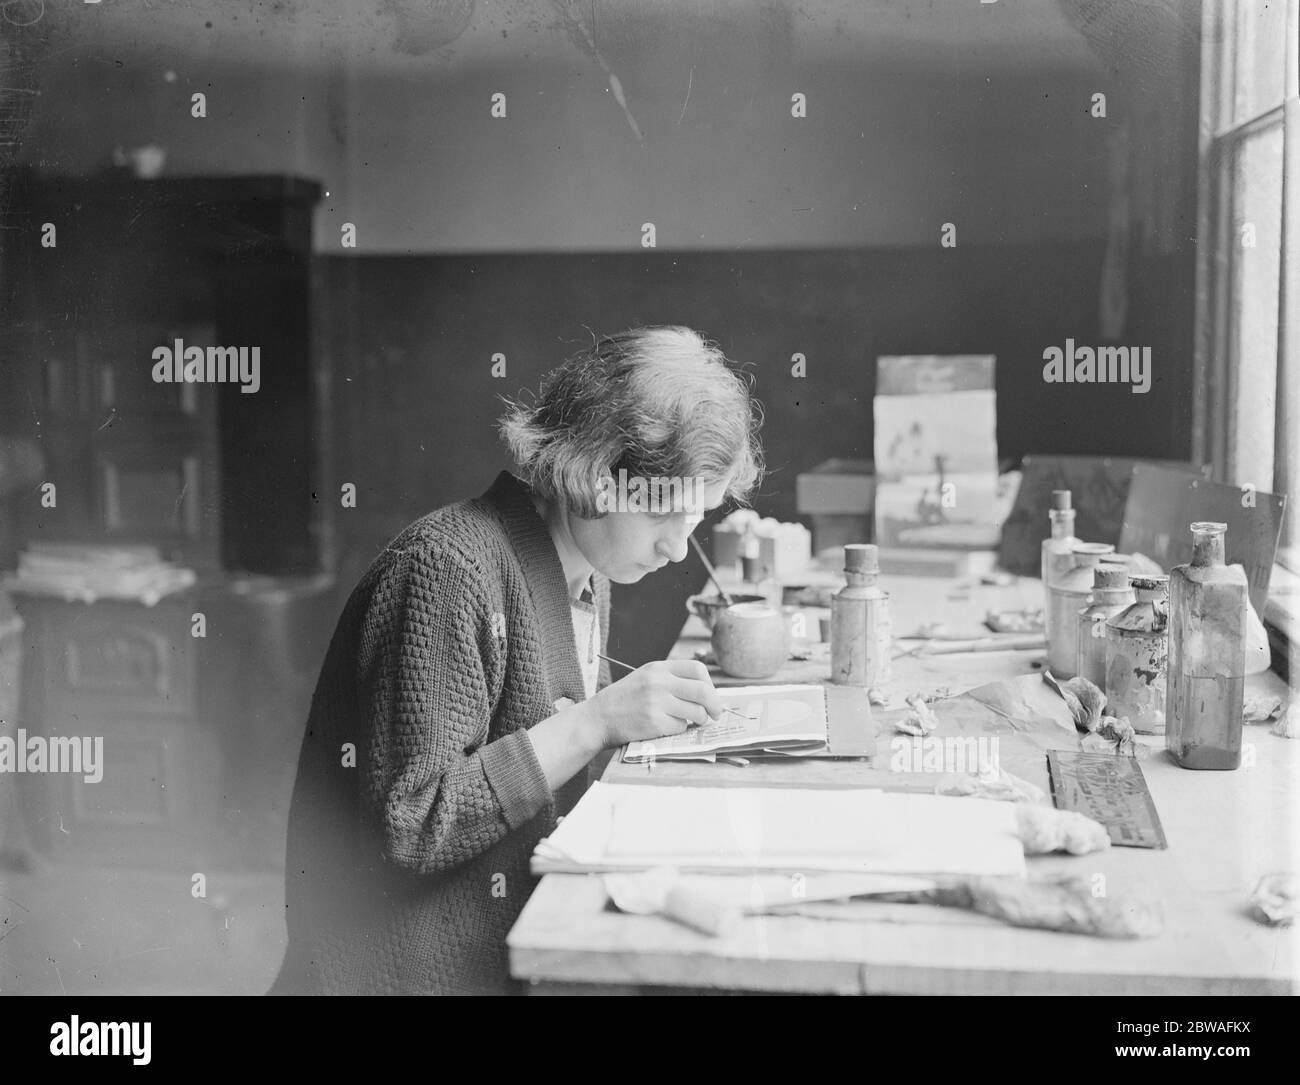 The making of decorative stainless steel ornaments by women workers at Birmingham Etching by means of Acid 8 September 1925 Stock Photo